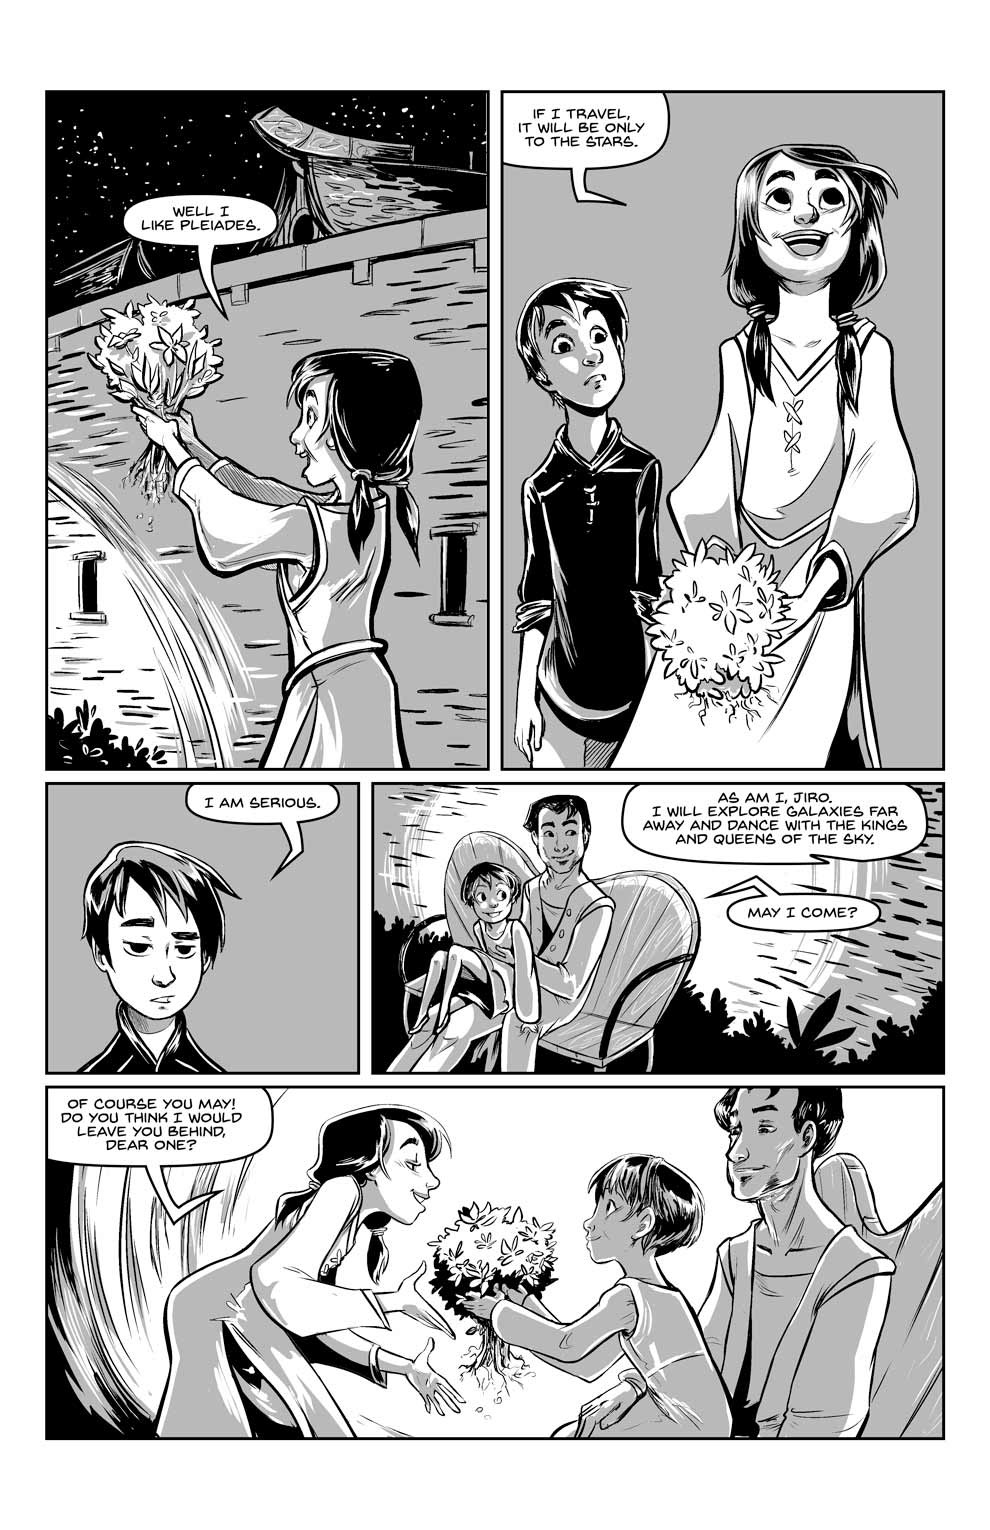 Adobe Portfolio comic Graphic Novel pages inks fantasy adventure Character Acting